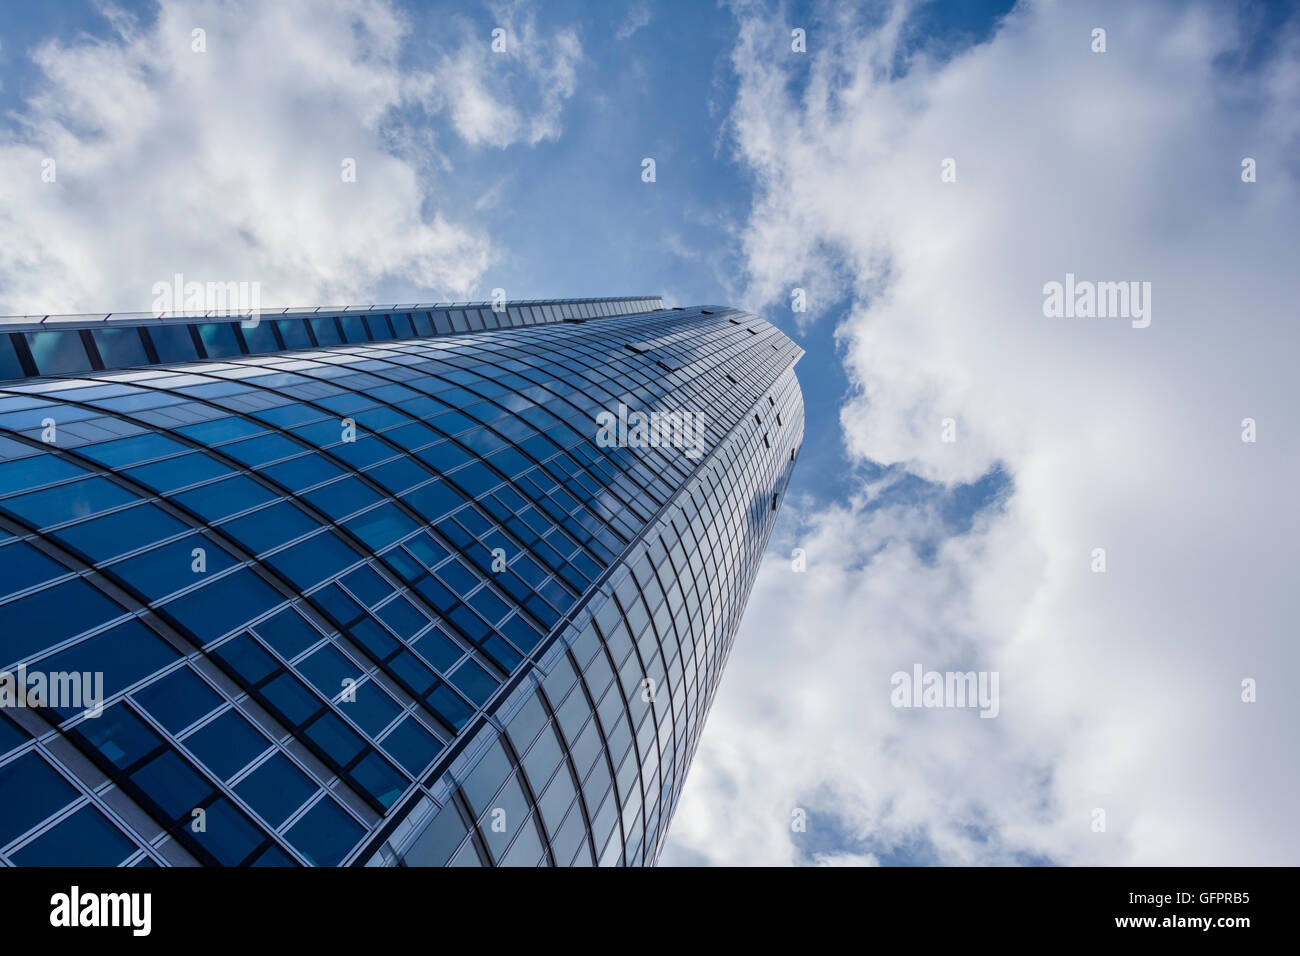 https://c8.alamy.com/comp/GFPRB5/looking-up-at-a-tall-building-with-an-cloudy-sky-above-GFPRB5.jpg